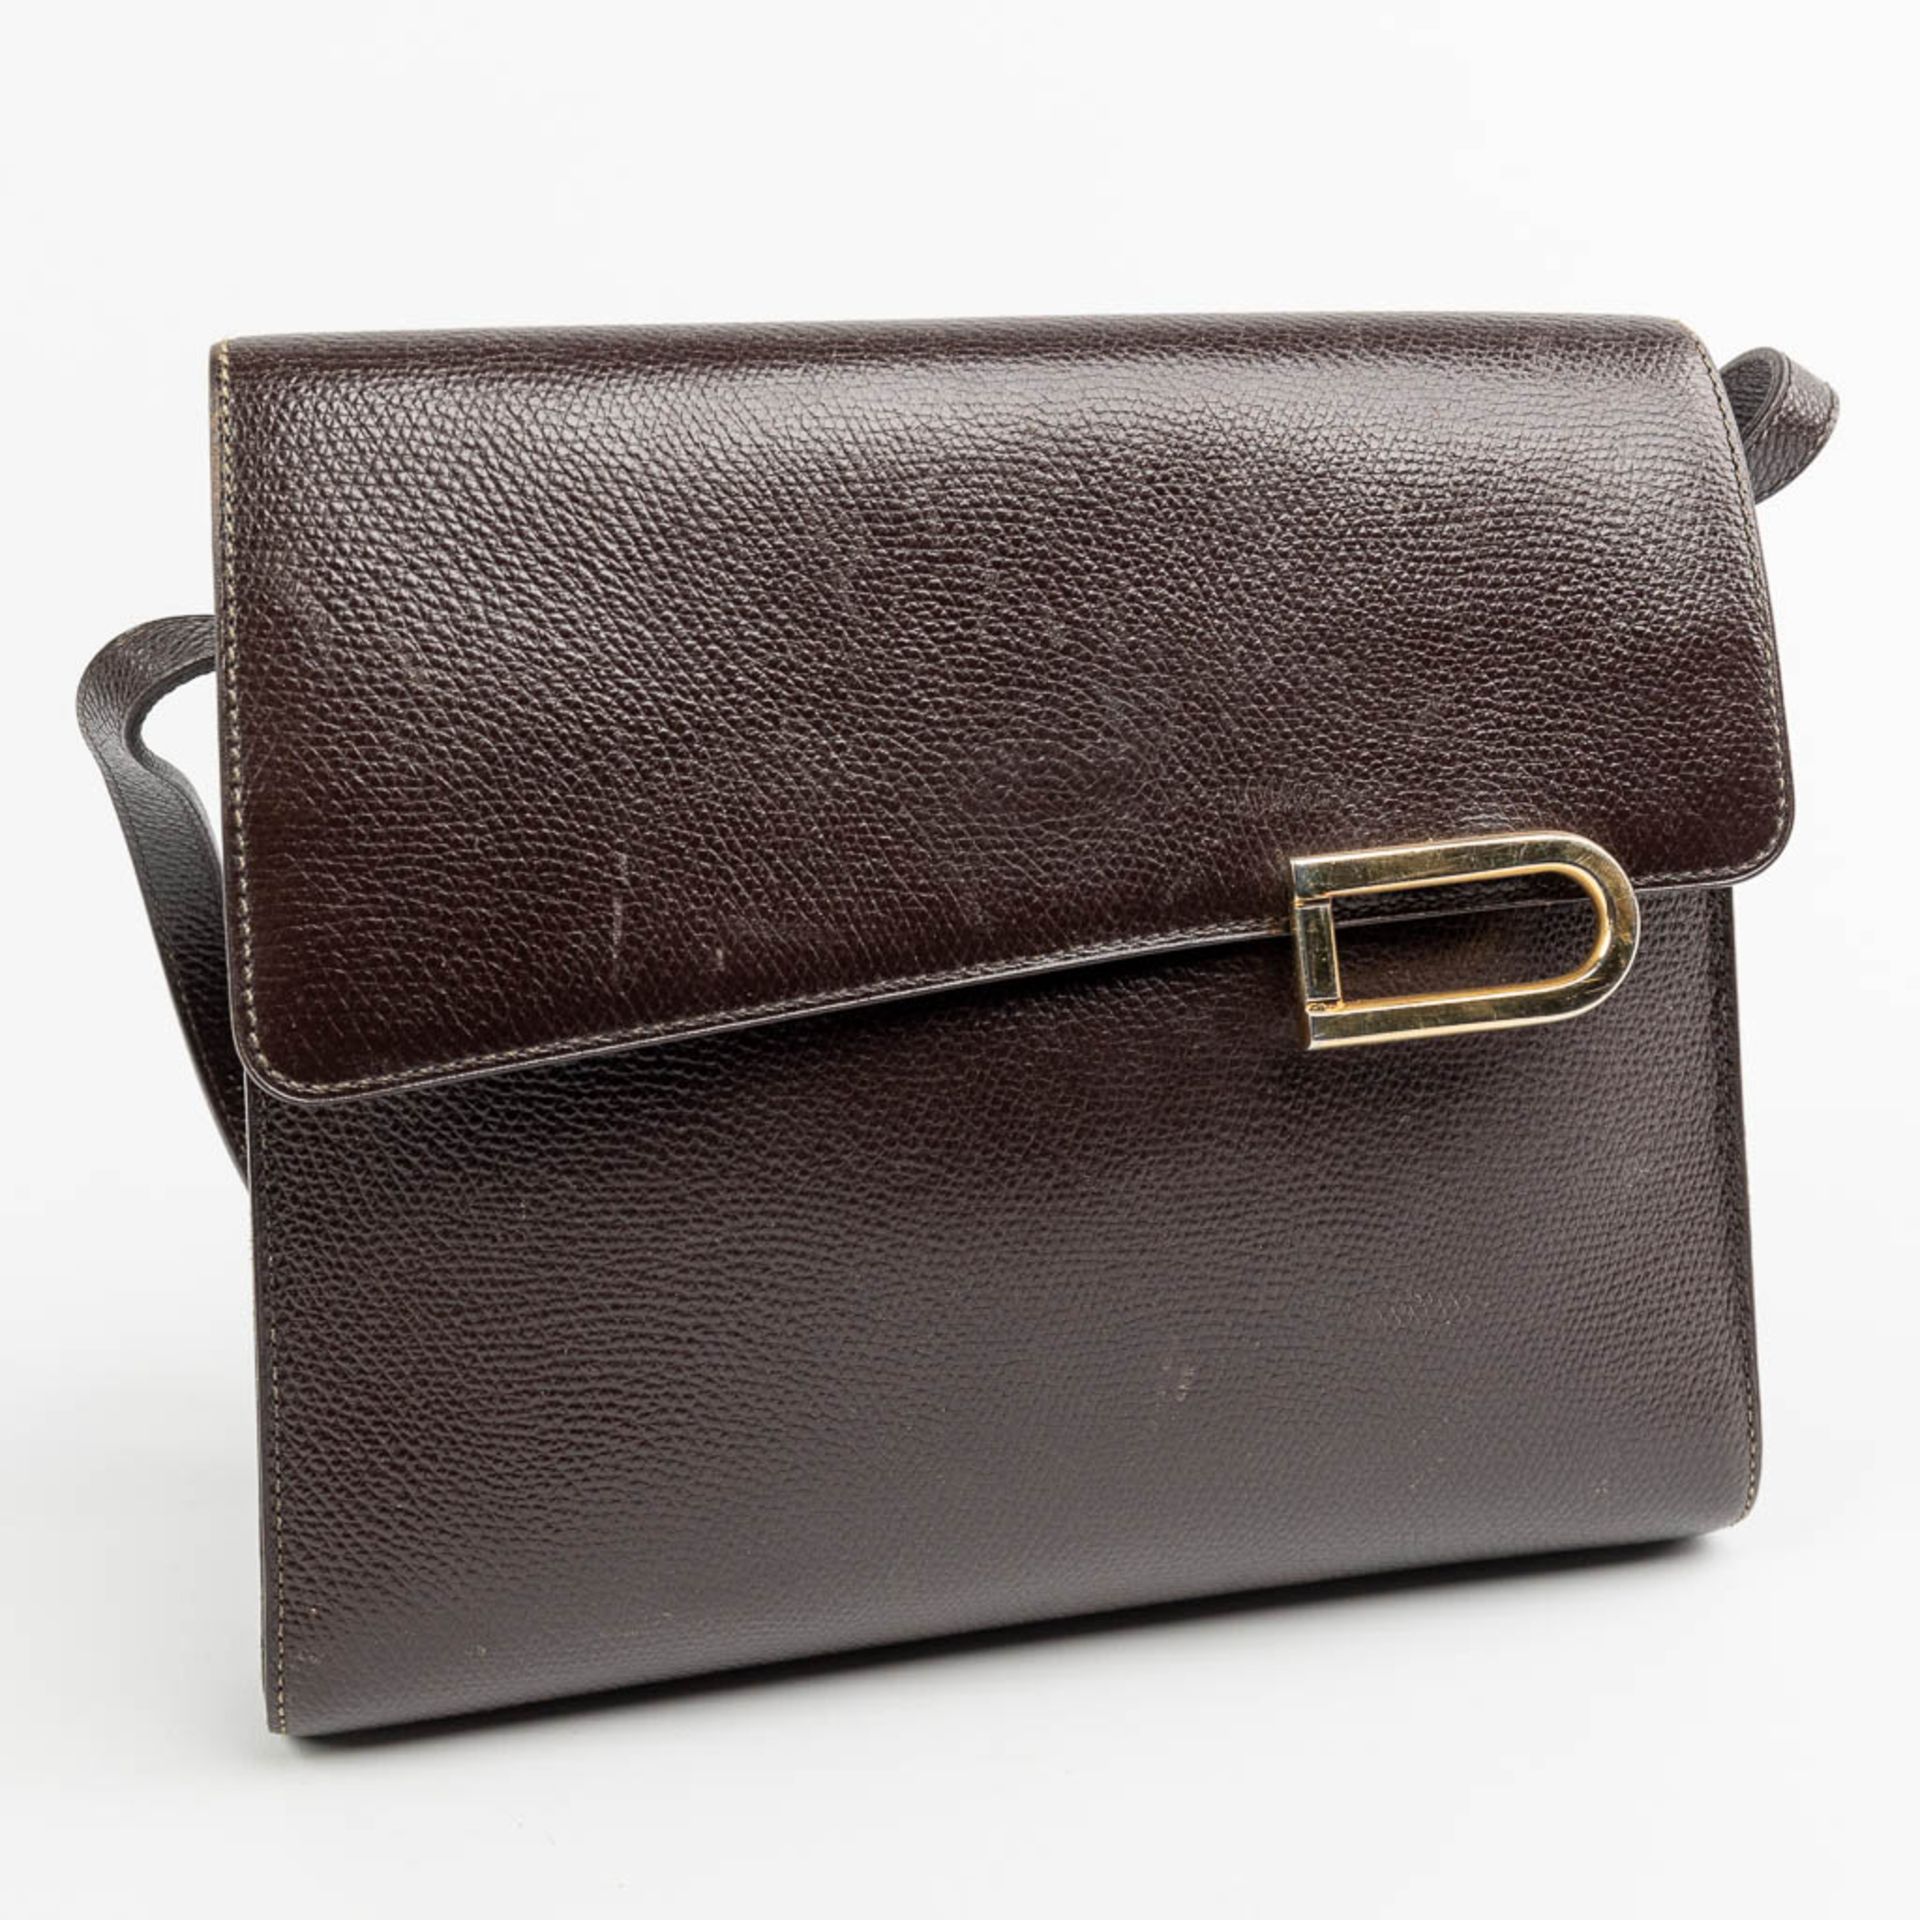 A purse made of brown leather and marked Delvaux. - Image 4 of 12